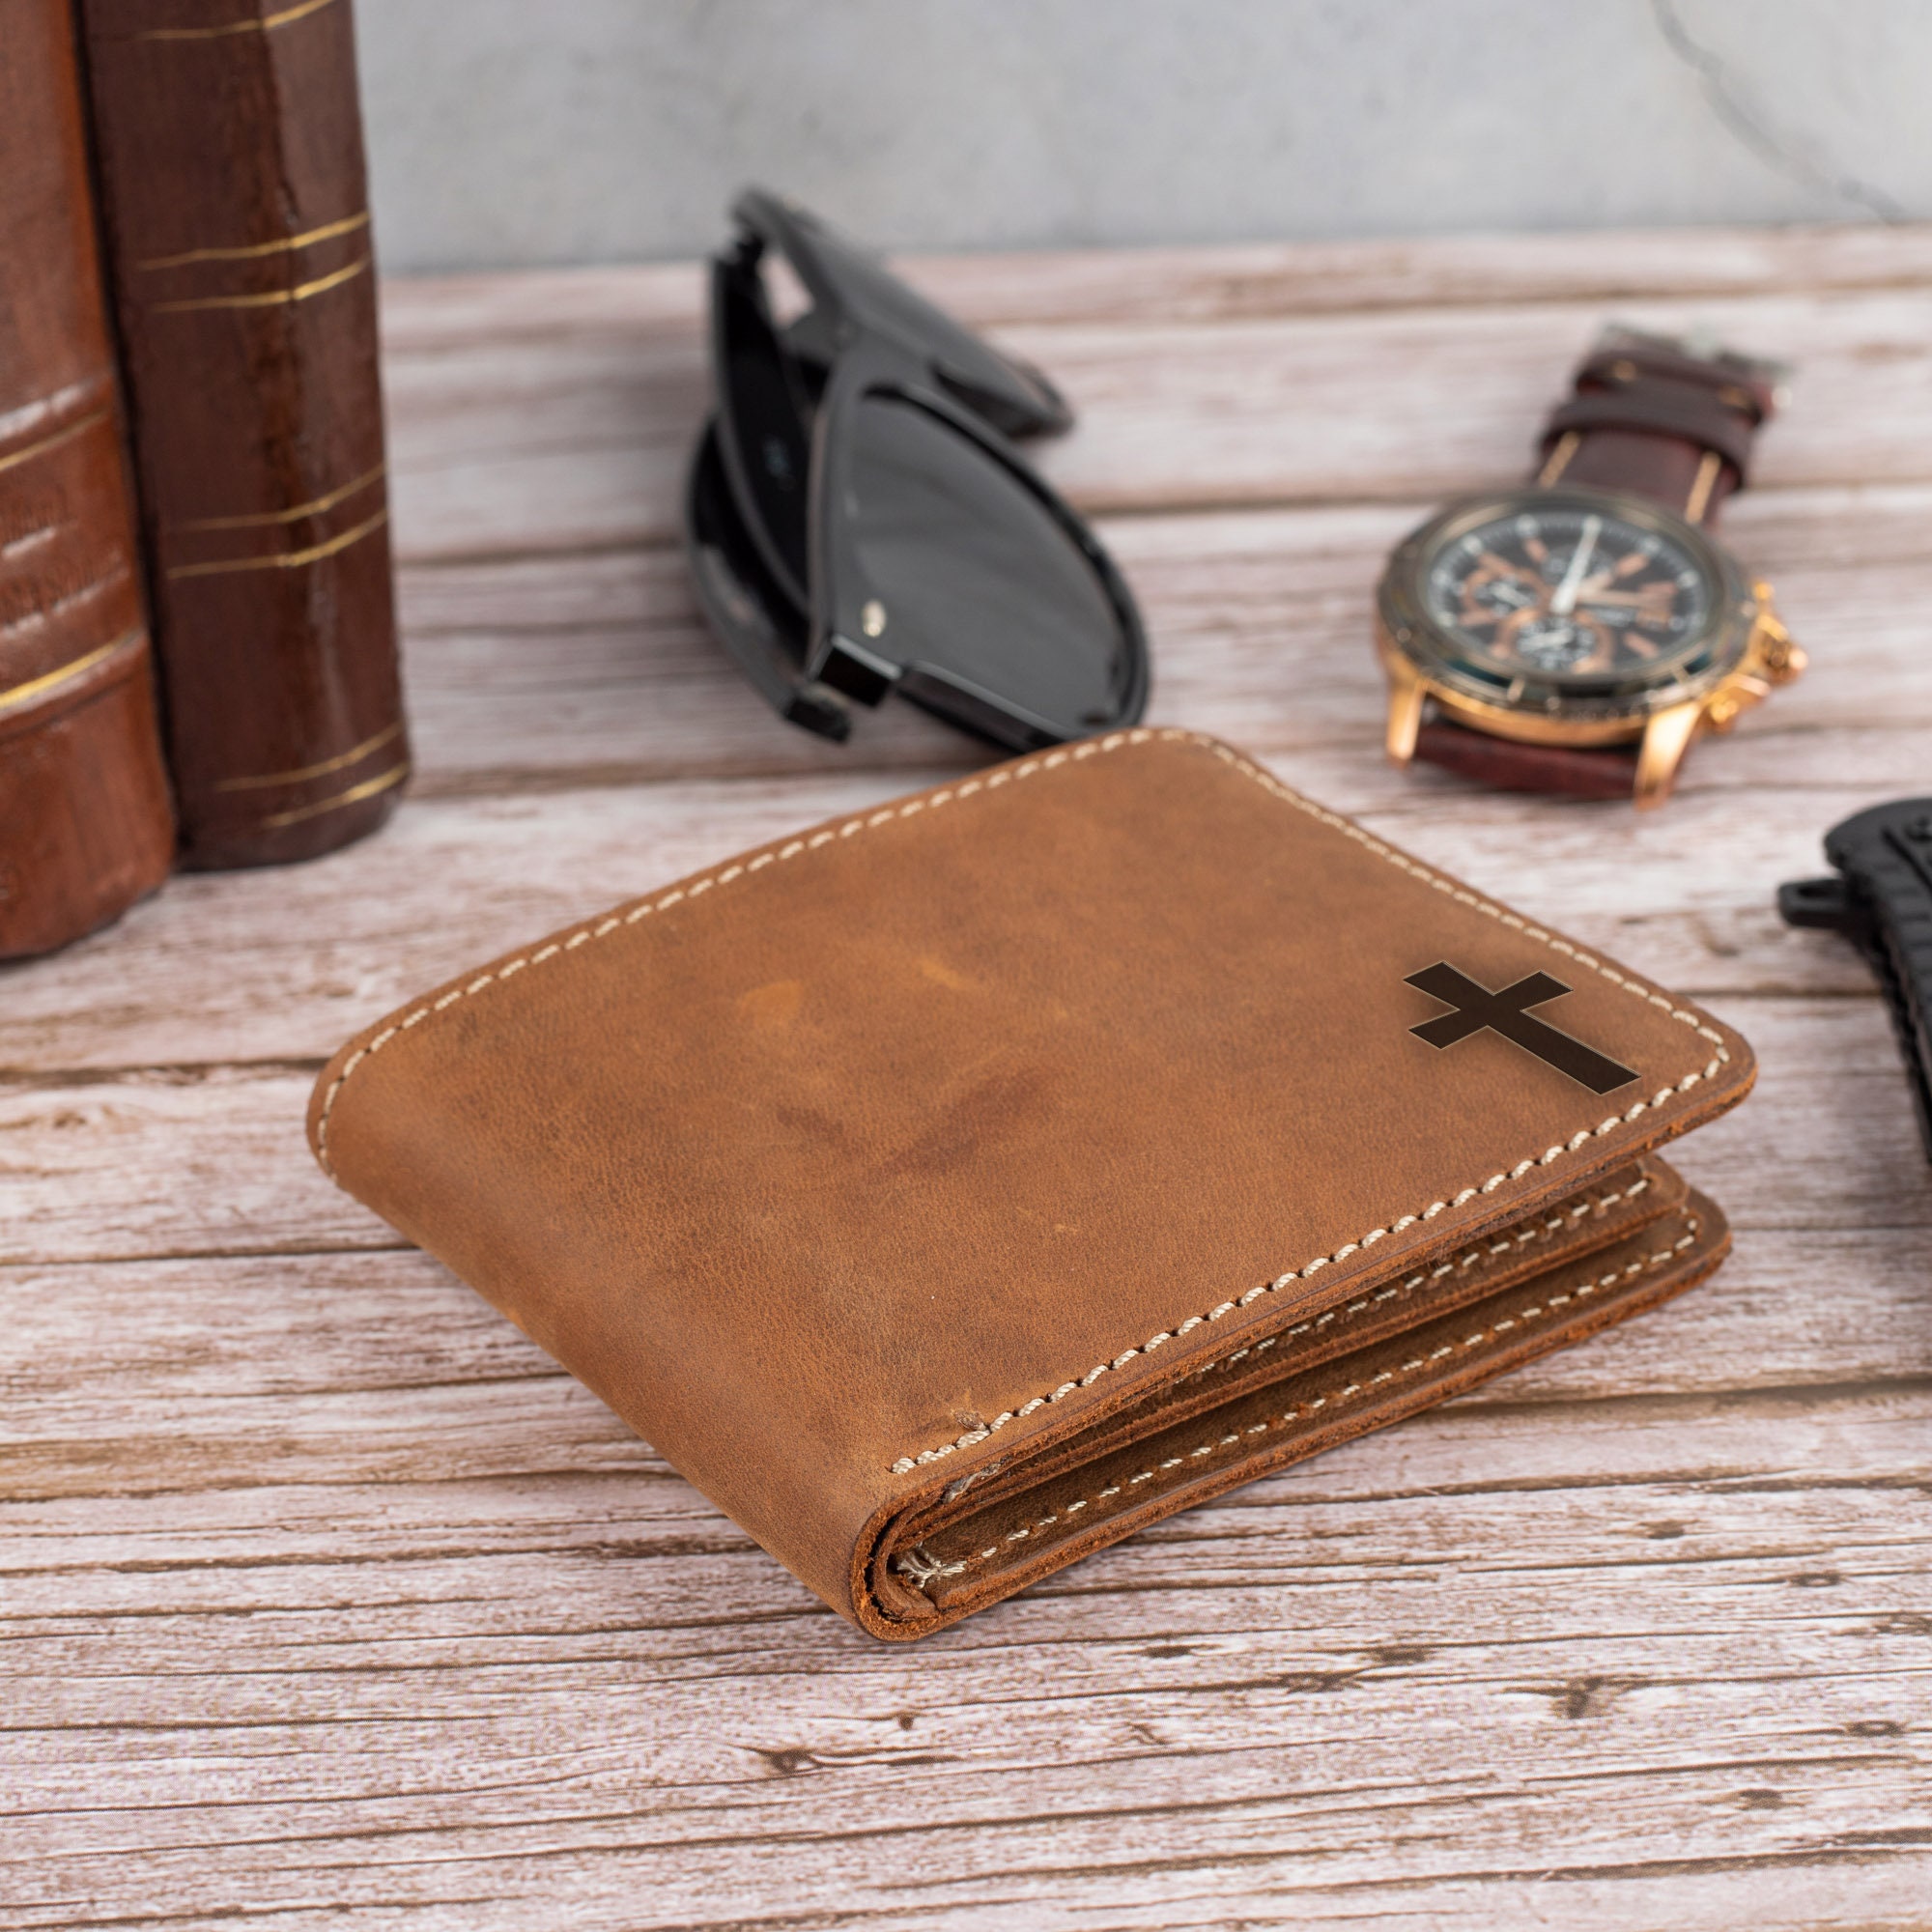 Christian Gifts ➤ Personalized Wallet. Handmade Leather Wallet